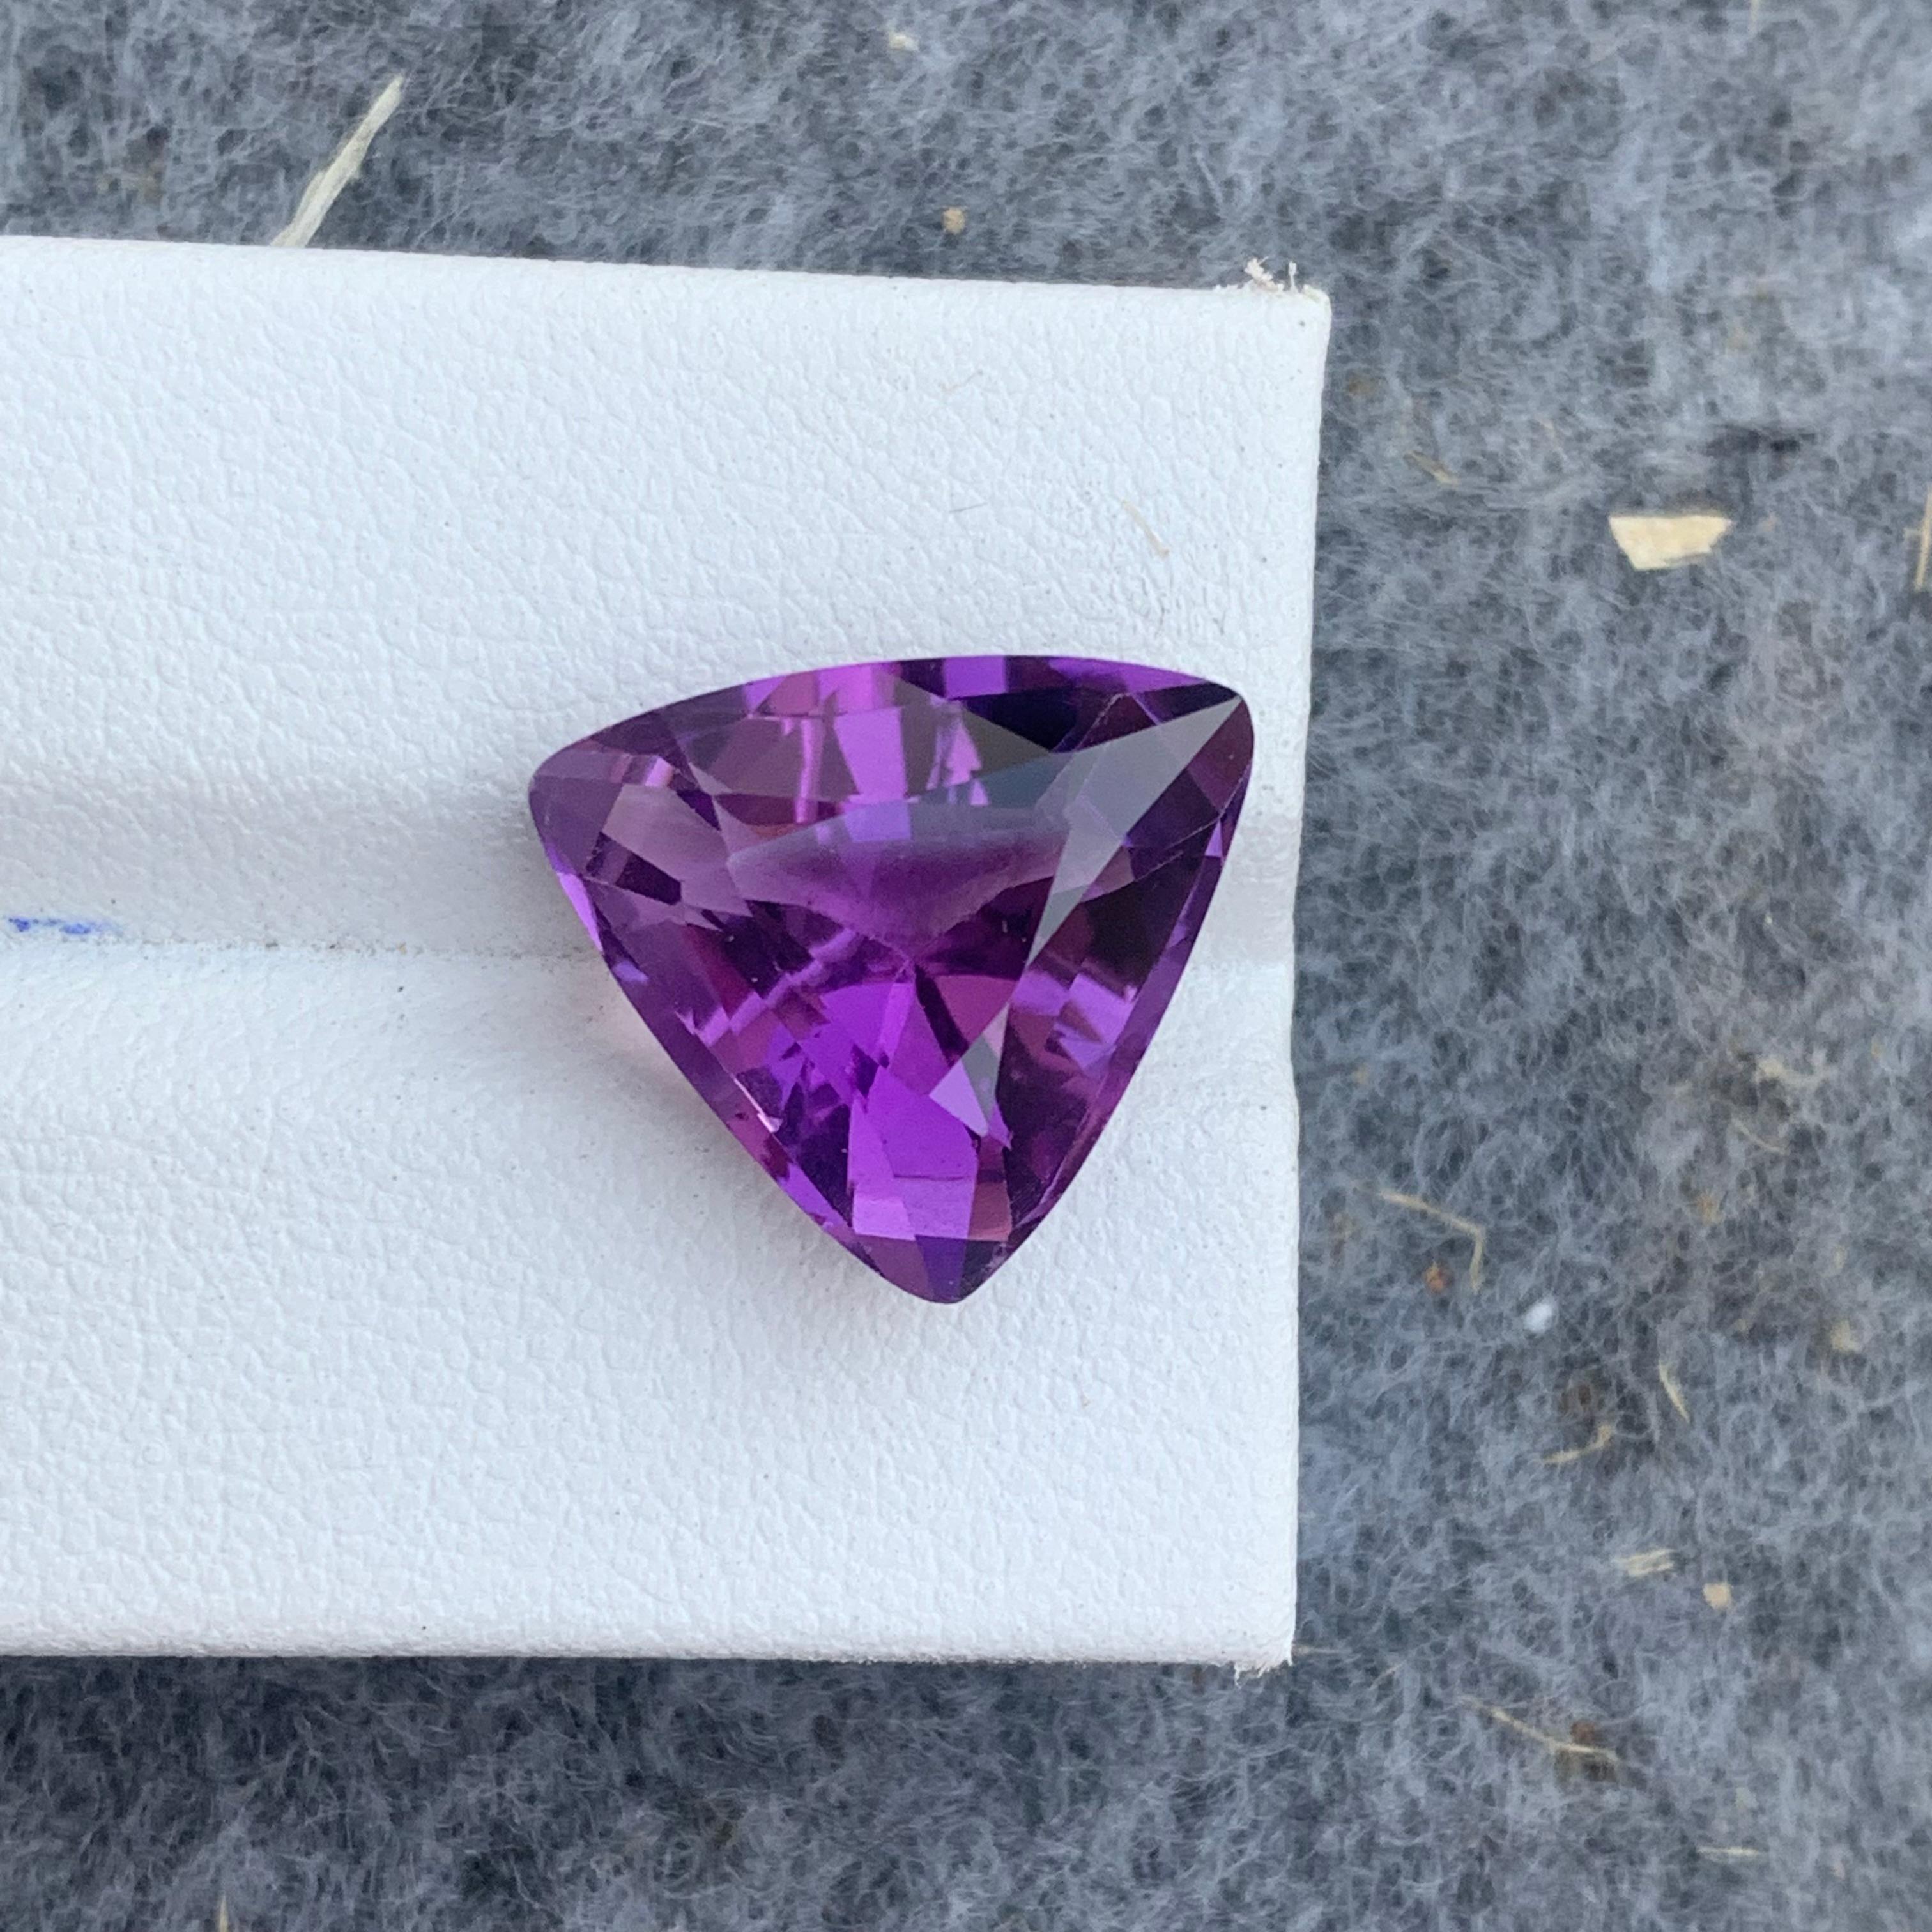 Gemstone Type : Amethyst
Weight : 9.20 Carats
Dimensions : 15.4x15.2x8.7 mm
Clarity : Eye Clean
Origin : Brazil
Color: Purple
Shape: Trillion Cut
Certificate: On Demand
Month: February
.

Purported amethyst powers for healing
enhancing the immune